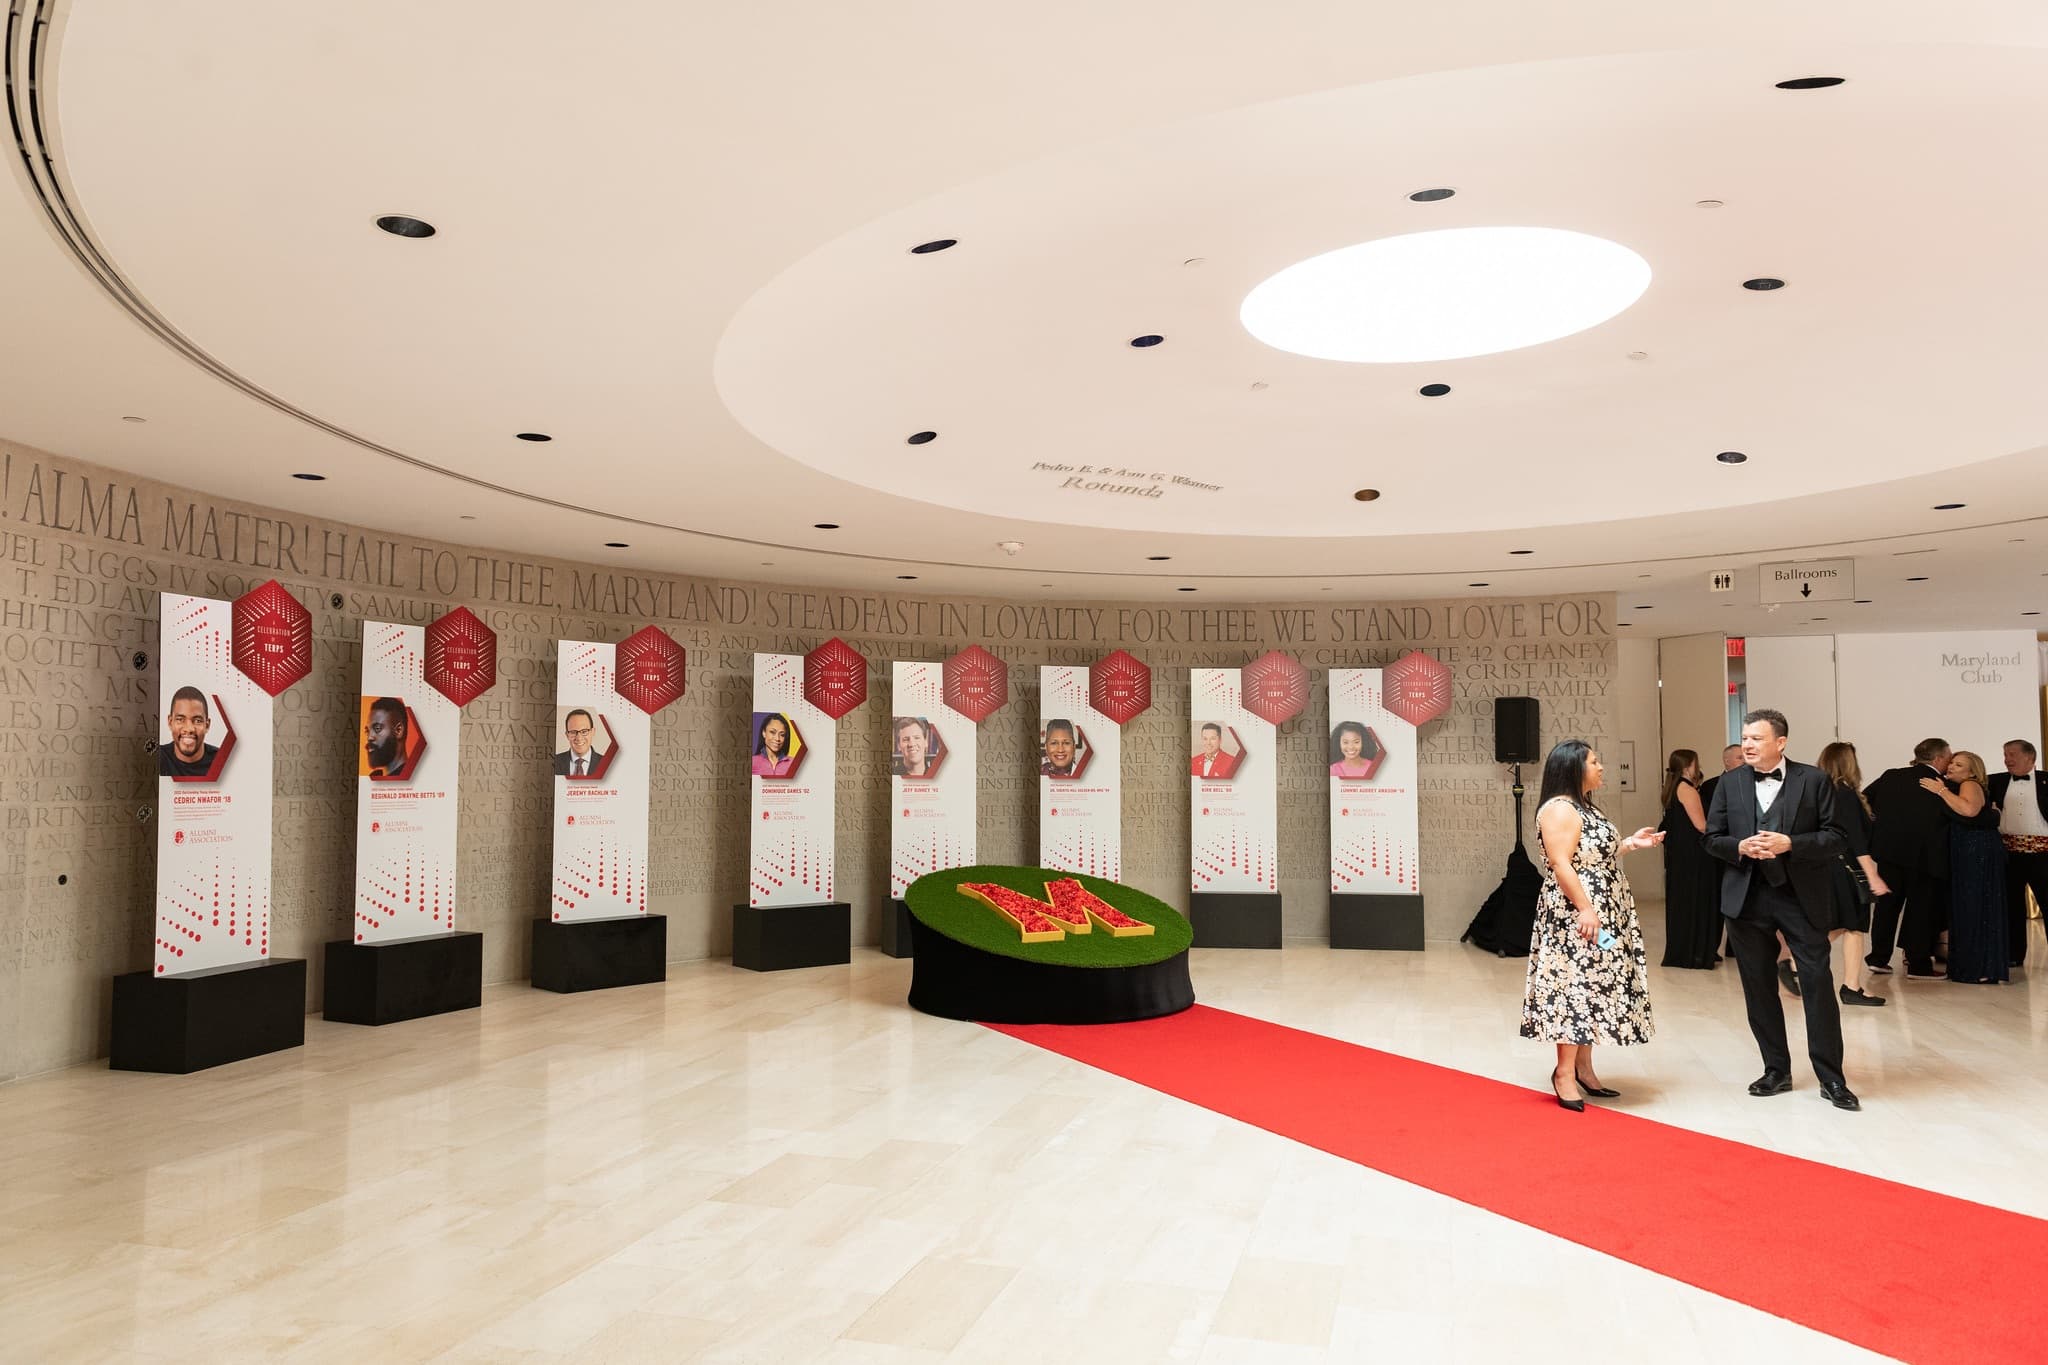 The Samuel Riggs IV Alumni Center rounded lobby, decorated with a red carpet over a clean white marble floor. Tall banners each featuring an award winner of the festivities lines the wall.